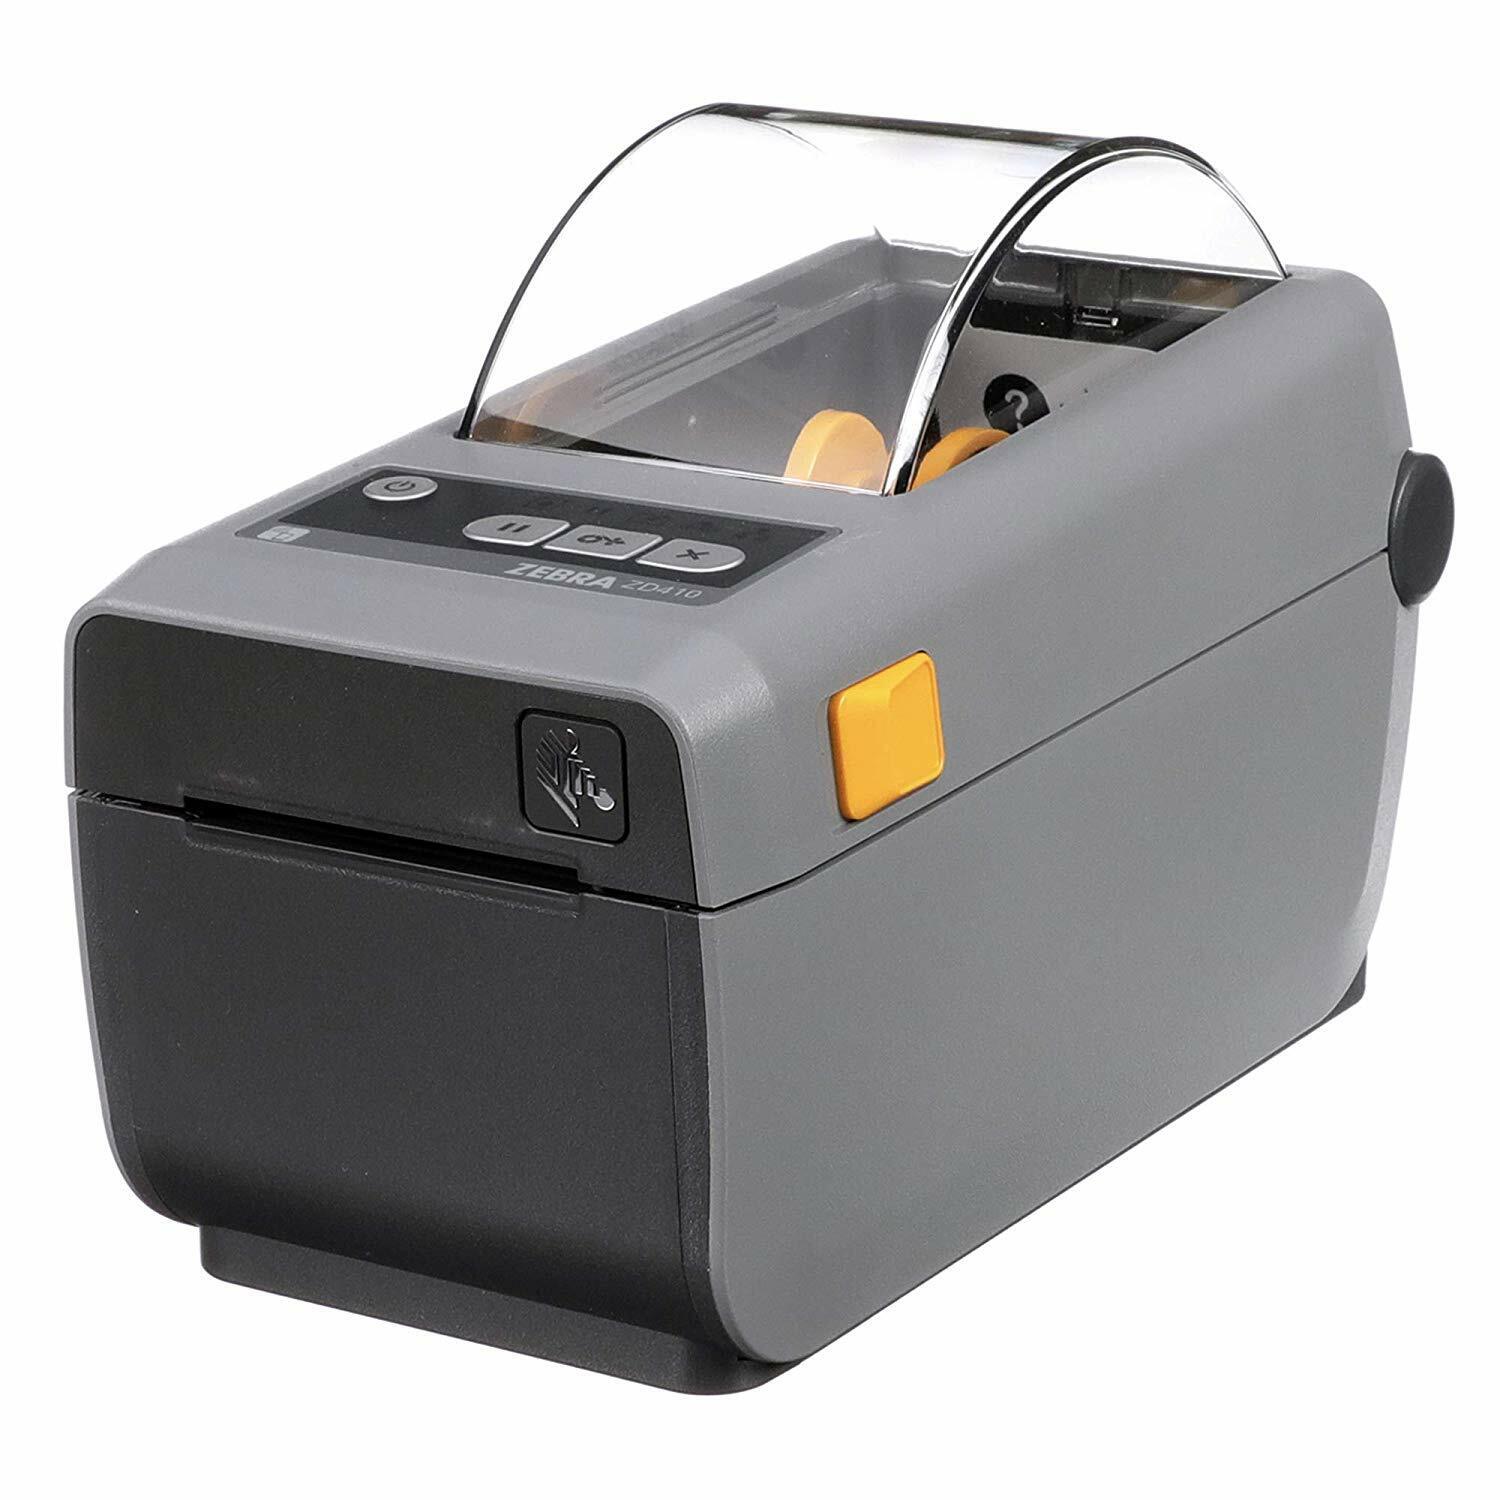 Zebra ZD410 Thermal Label/Barcode Printer for labels, Receipts, Barcodes, Tags